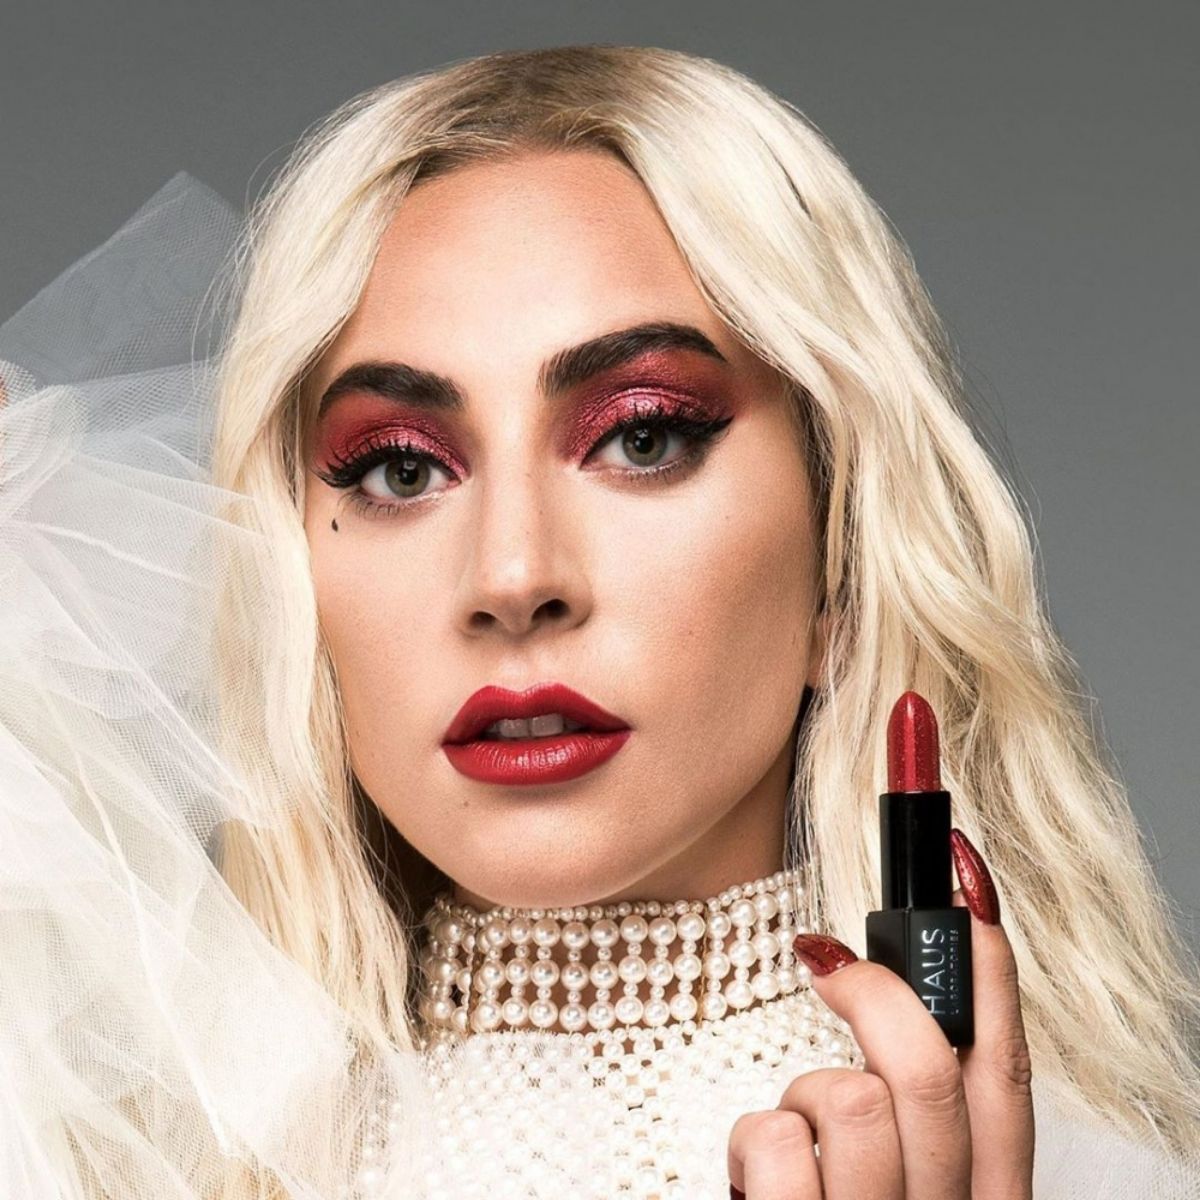 Lady Gaga for her own brand "Haus Laboratories"